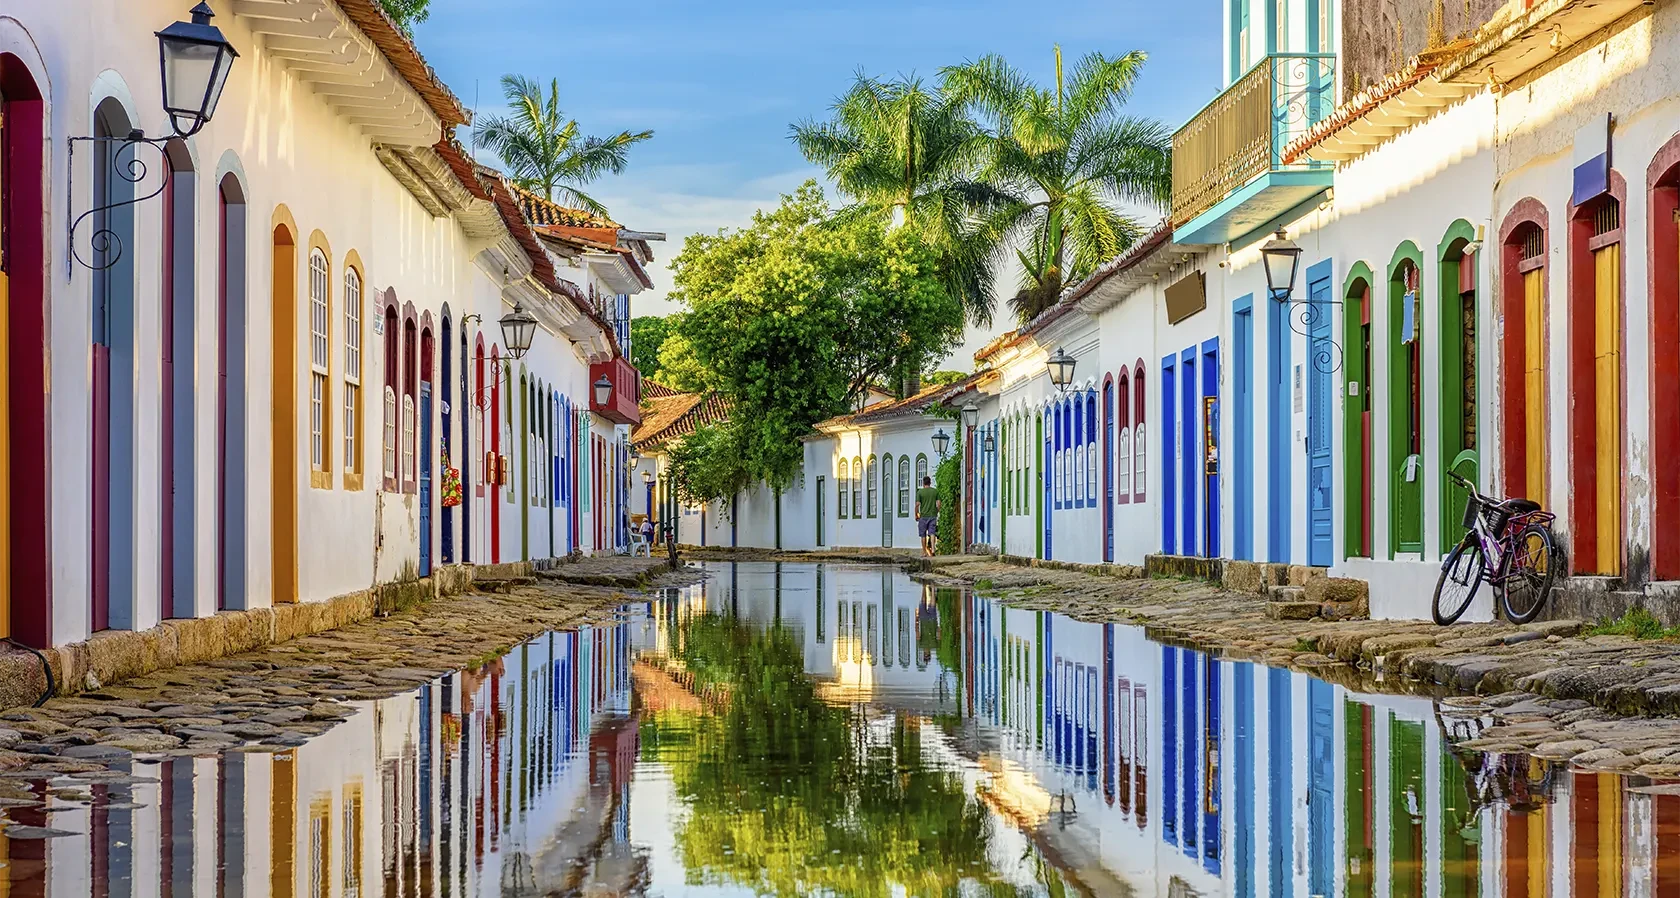 COMFORT AND TRADITIONIN THE HEART OF PARATY'S HISTORIC CENTER